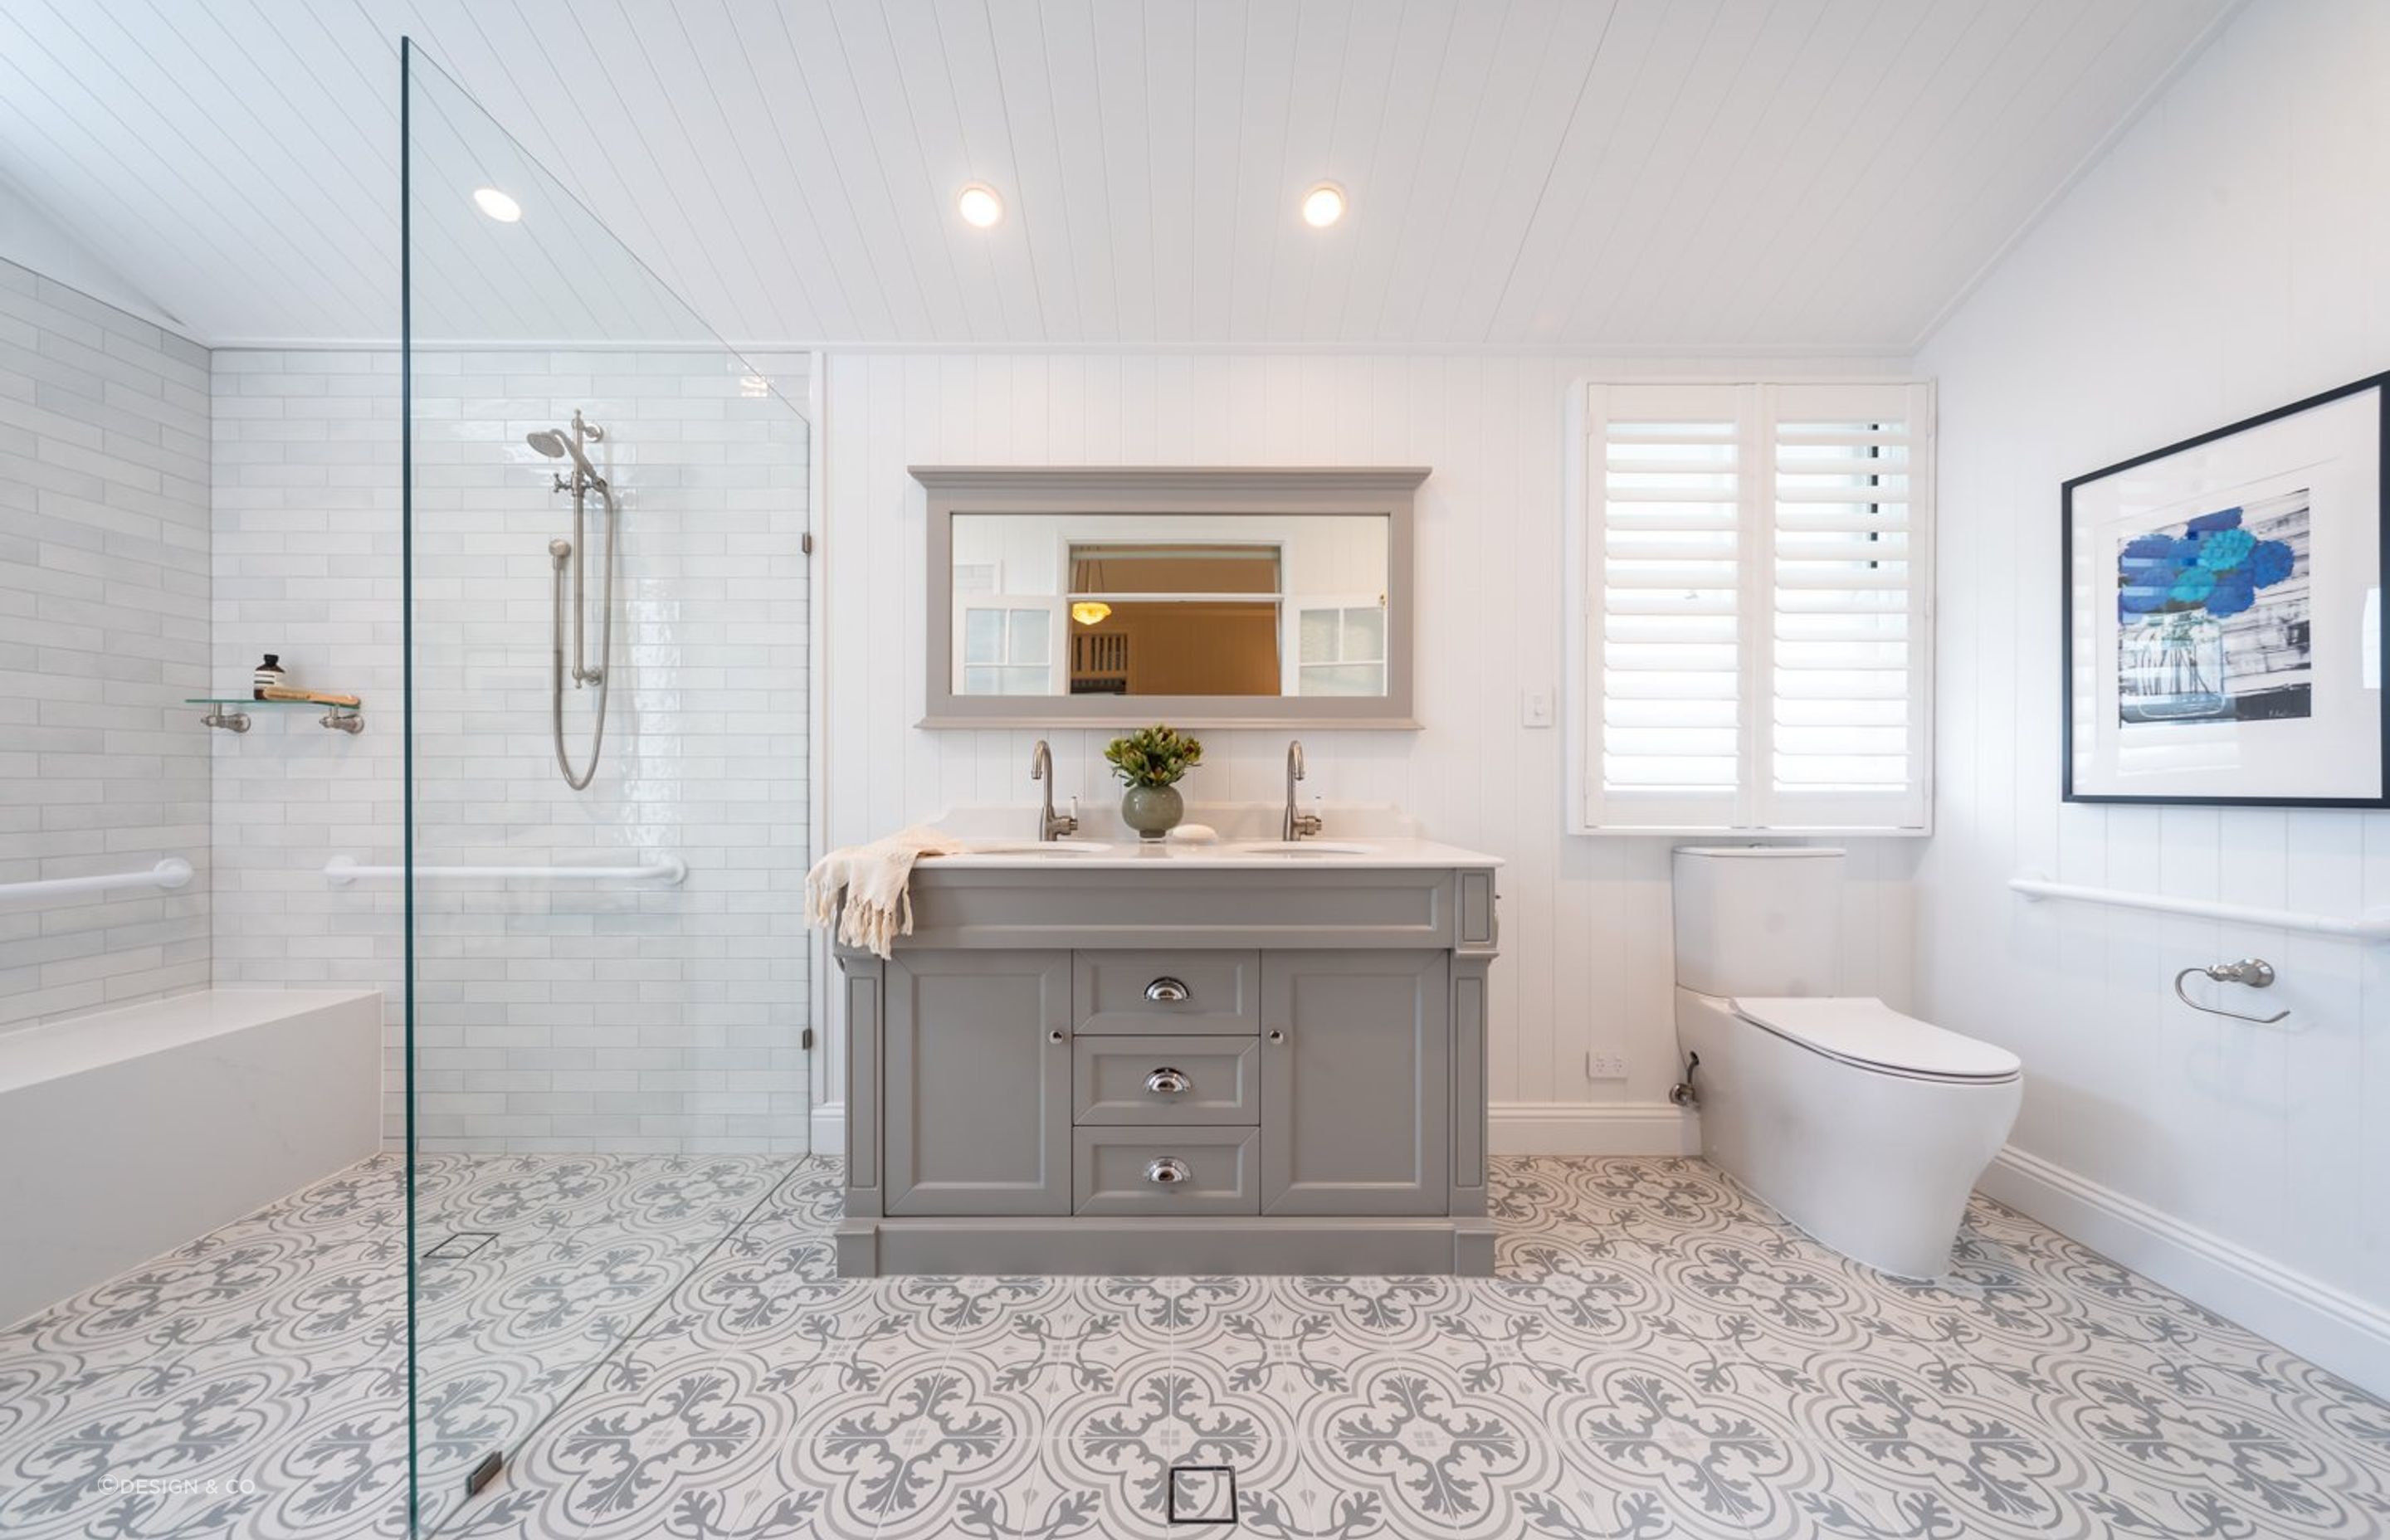 Strategically placing downlights near a special bathroom feature will help it stand out